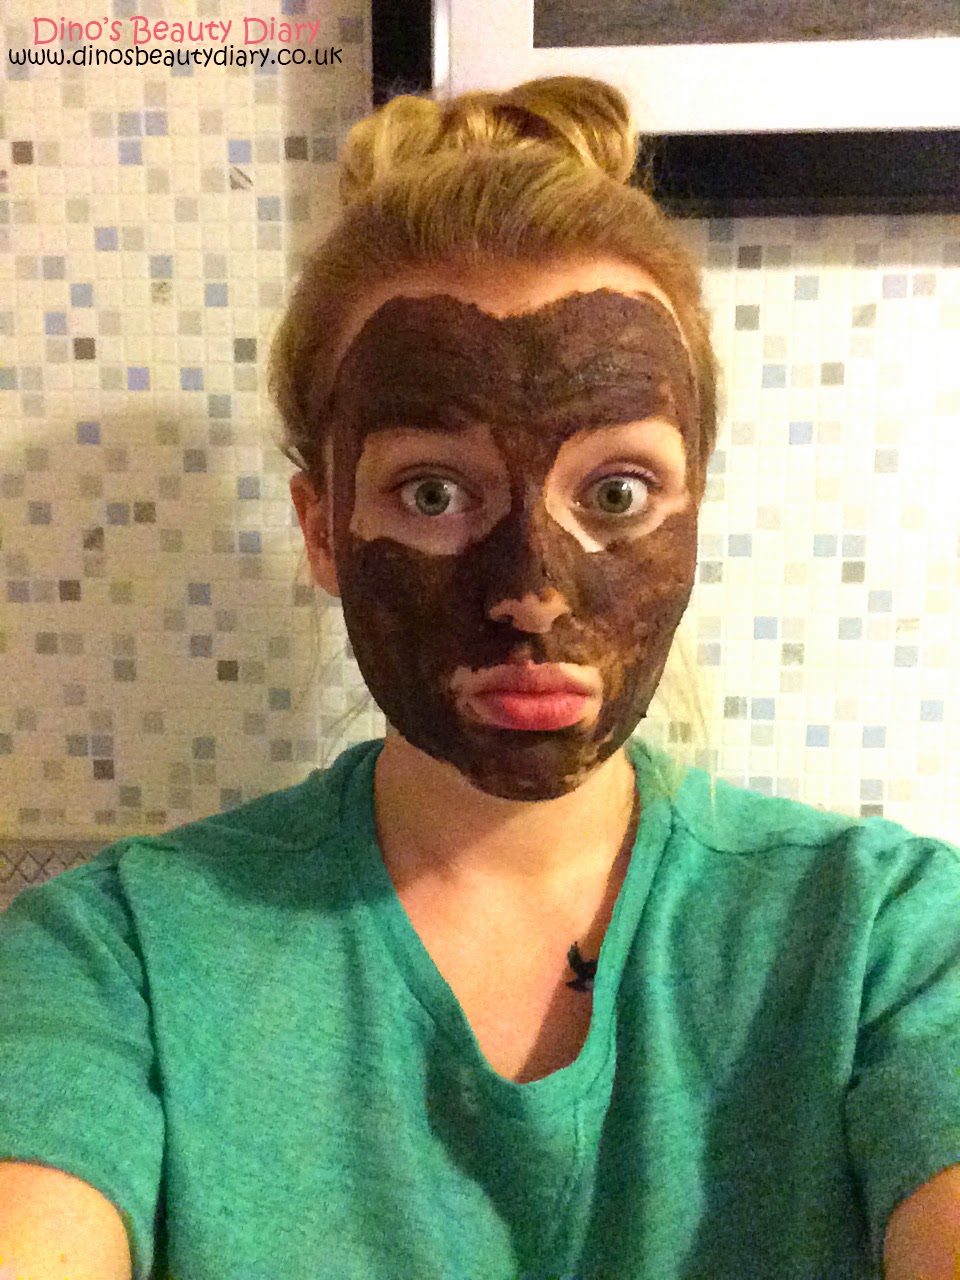 Dino's Beauty Diary - Lush Cupcake Face Mask Review